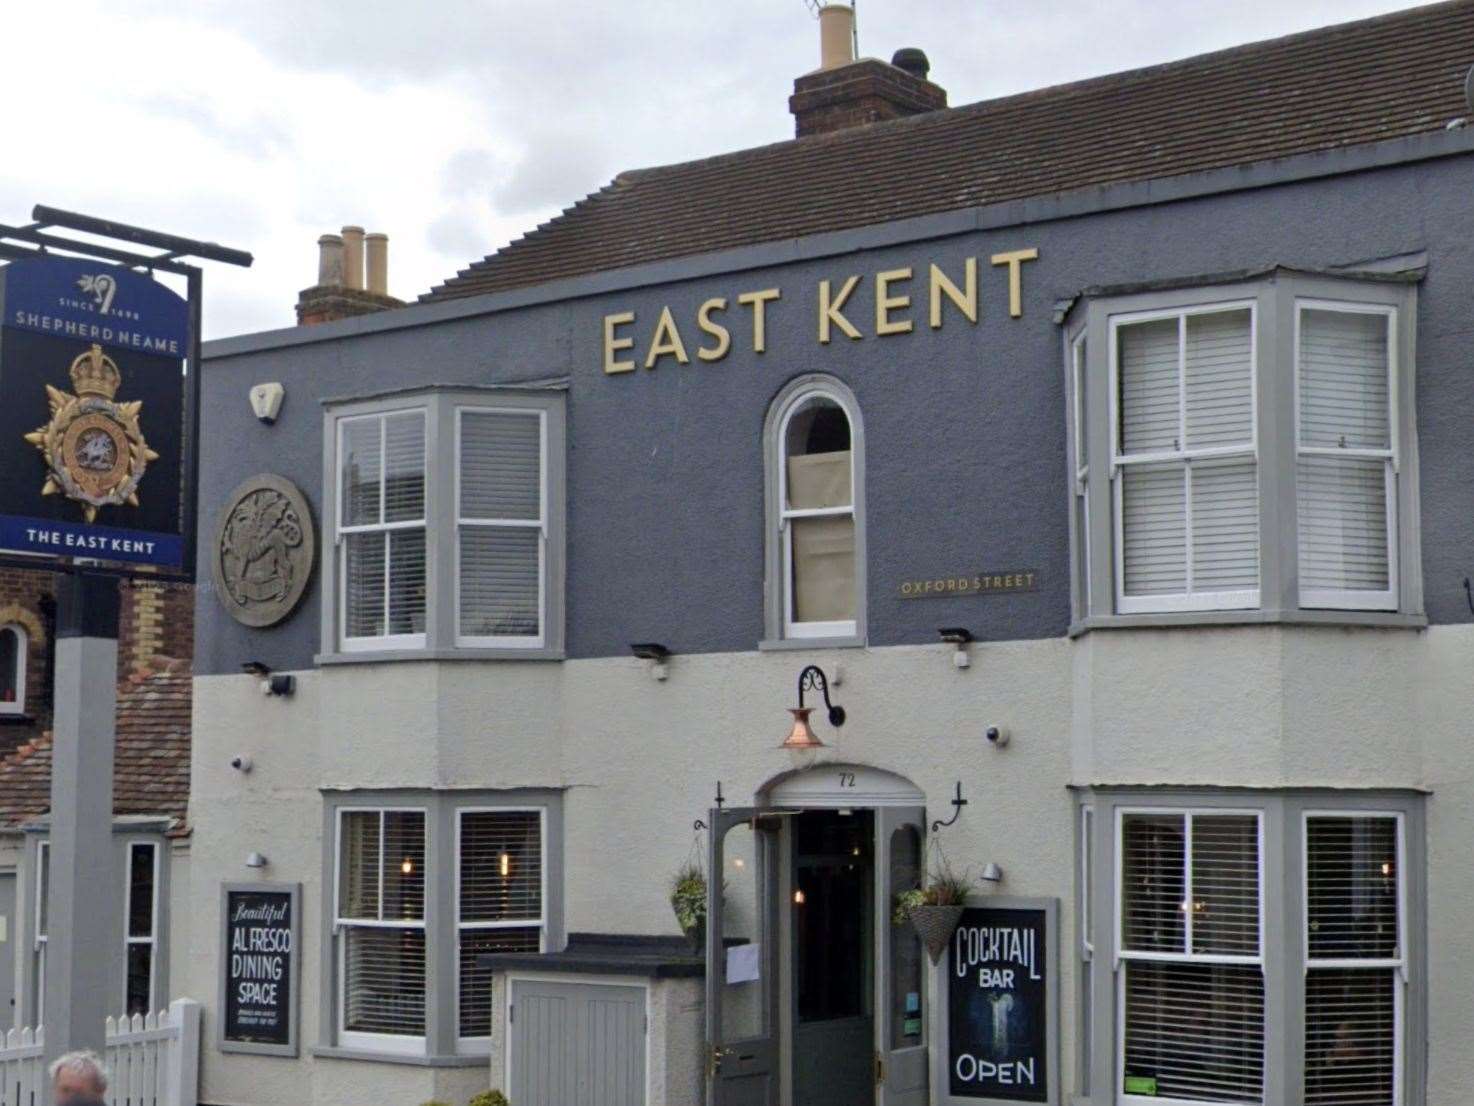 The East Kent pub in Oxford Street, Whitstable